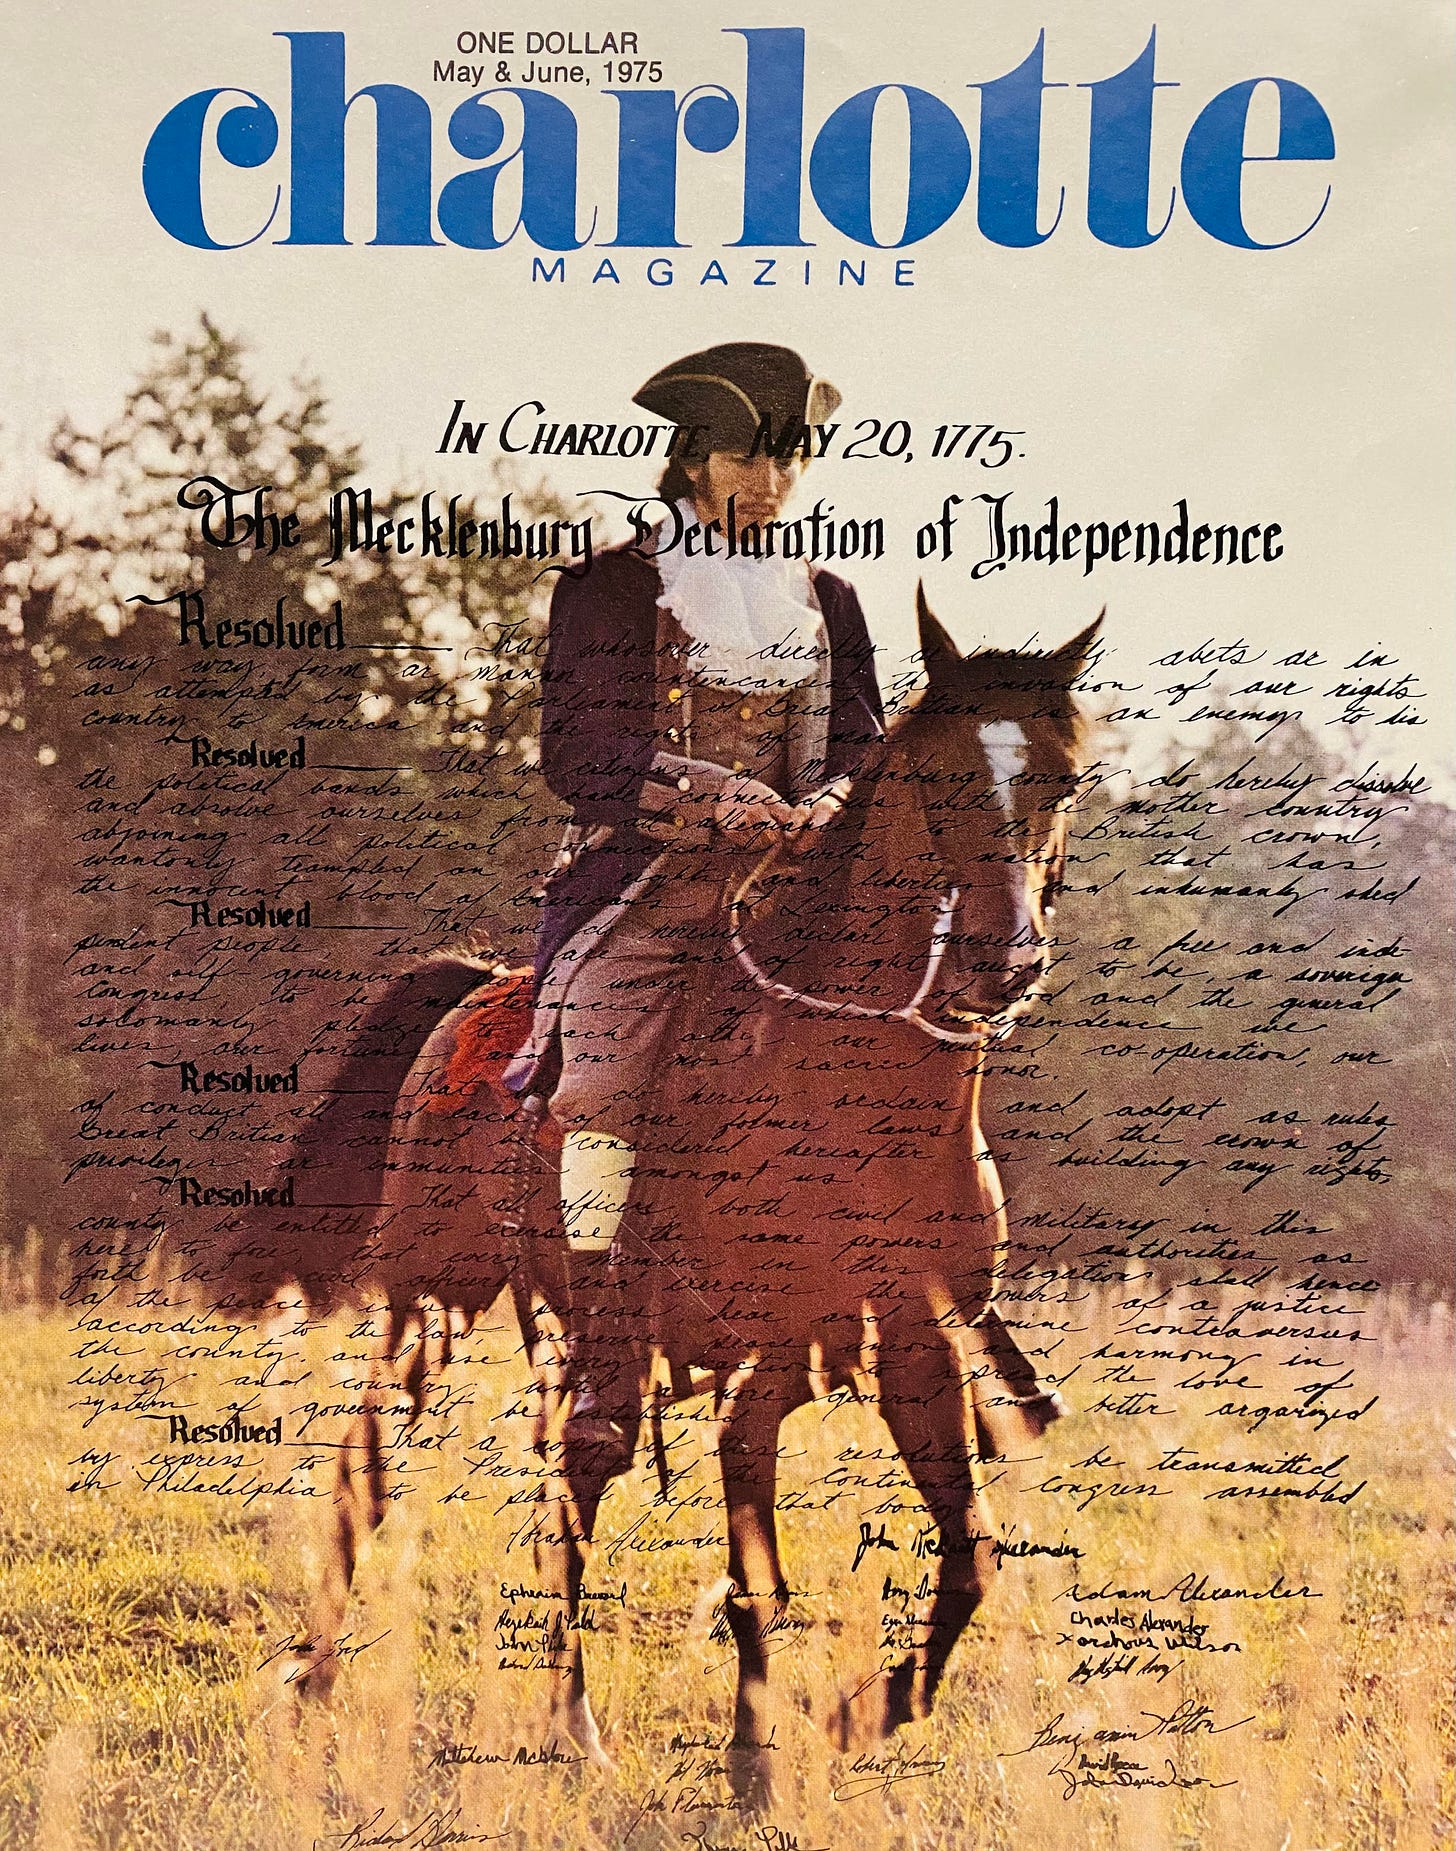 Jerry Linker on the Charlotte magazine cover, 1975